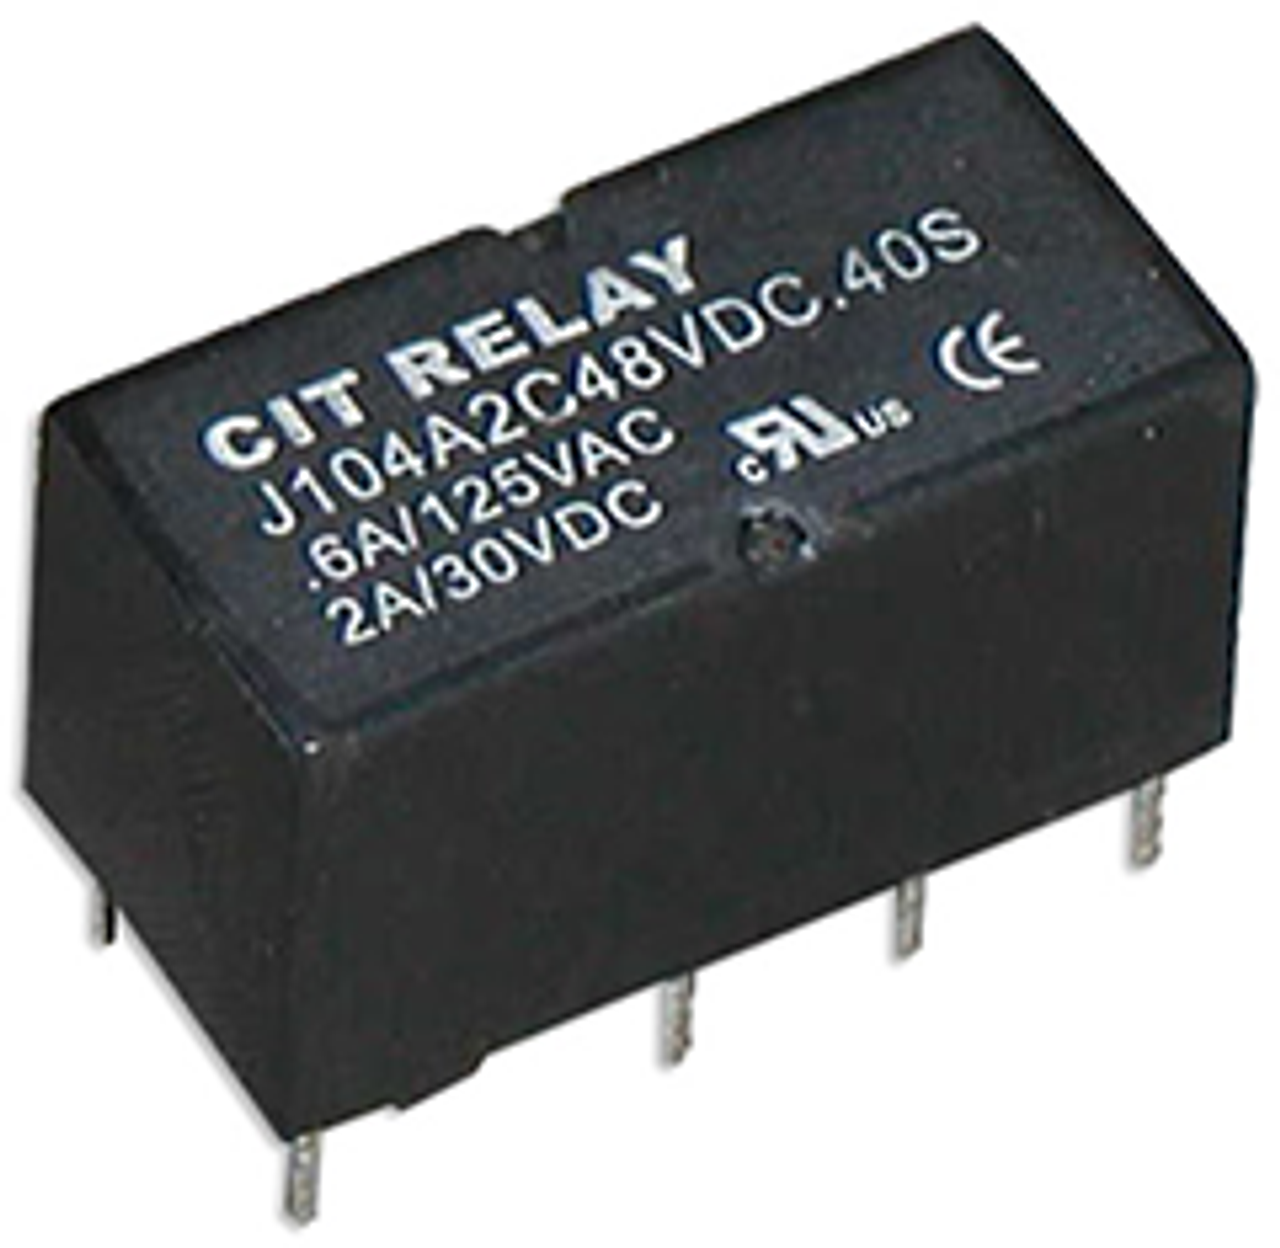 CIT Relay and Switch J104A2C24VDC.55S Power Relays